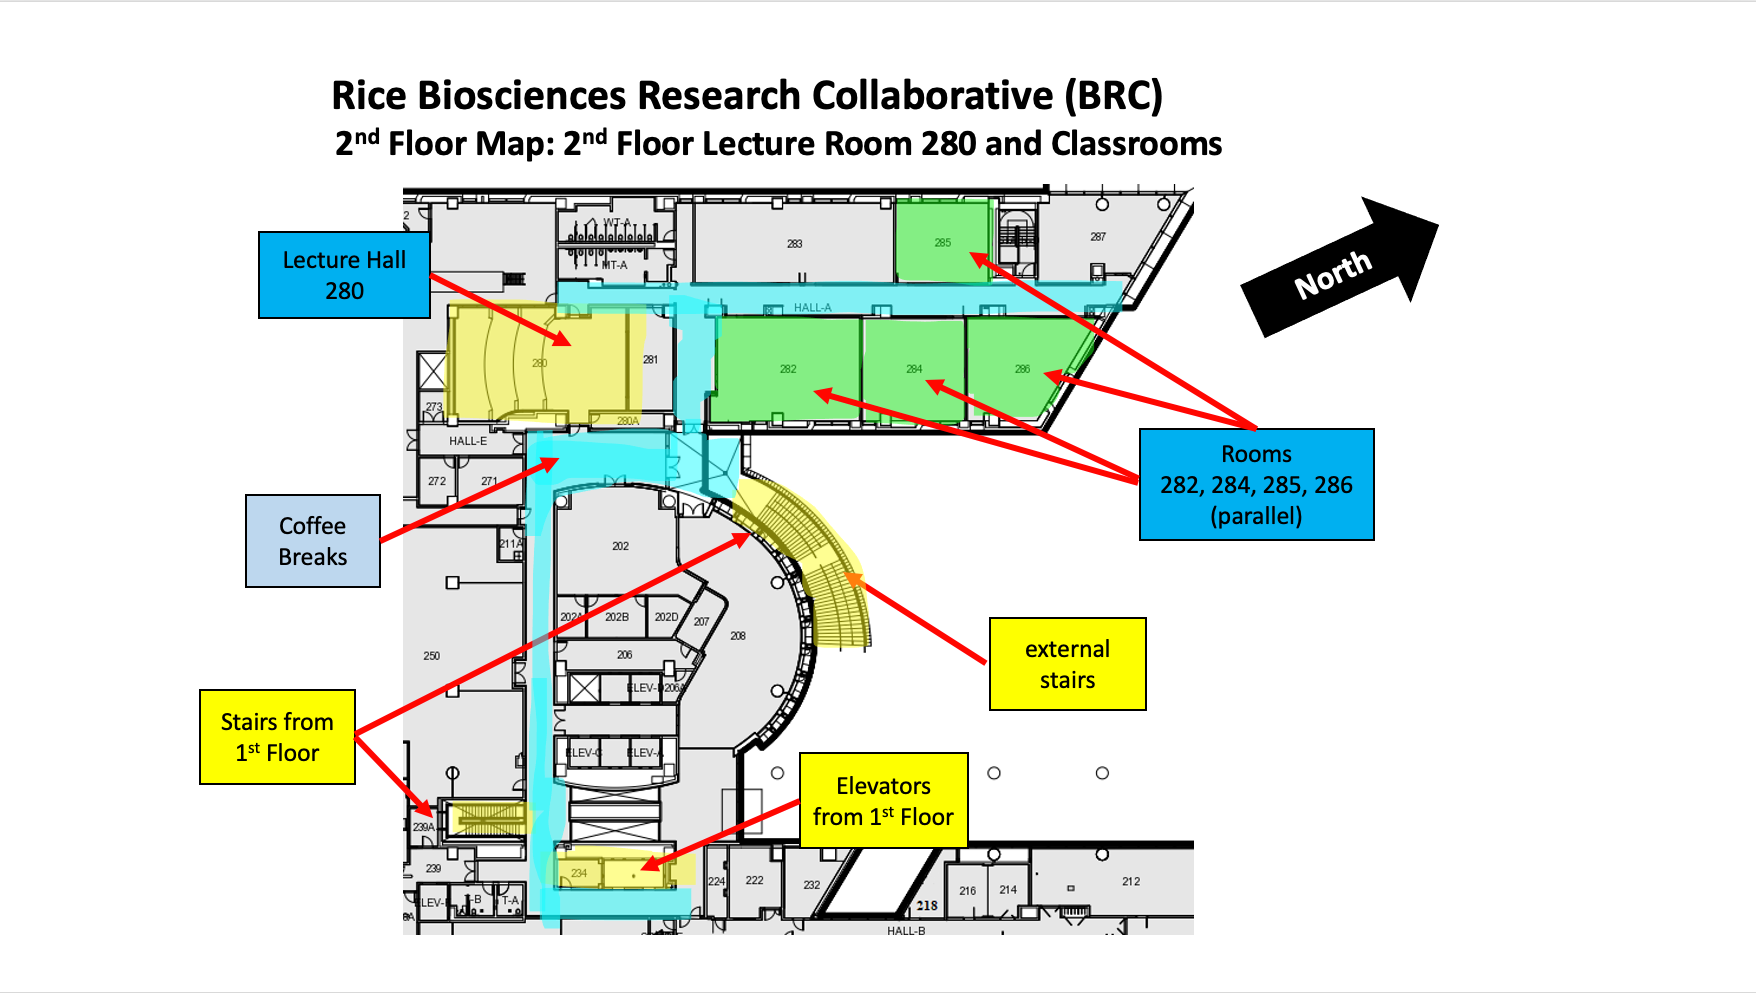 Rice BioSciences Research Collaborative - 2nd Floor Map